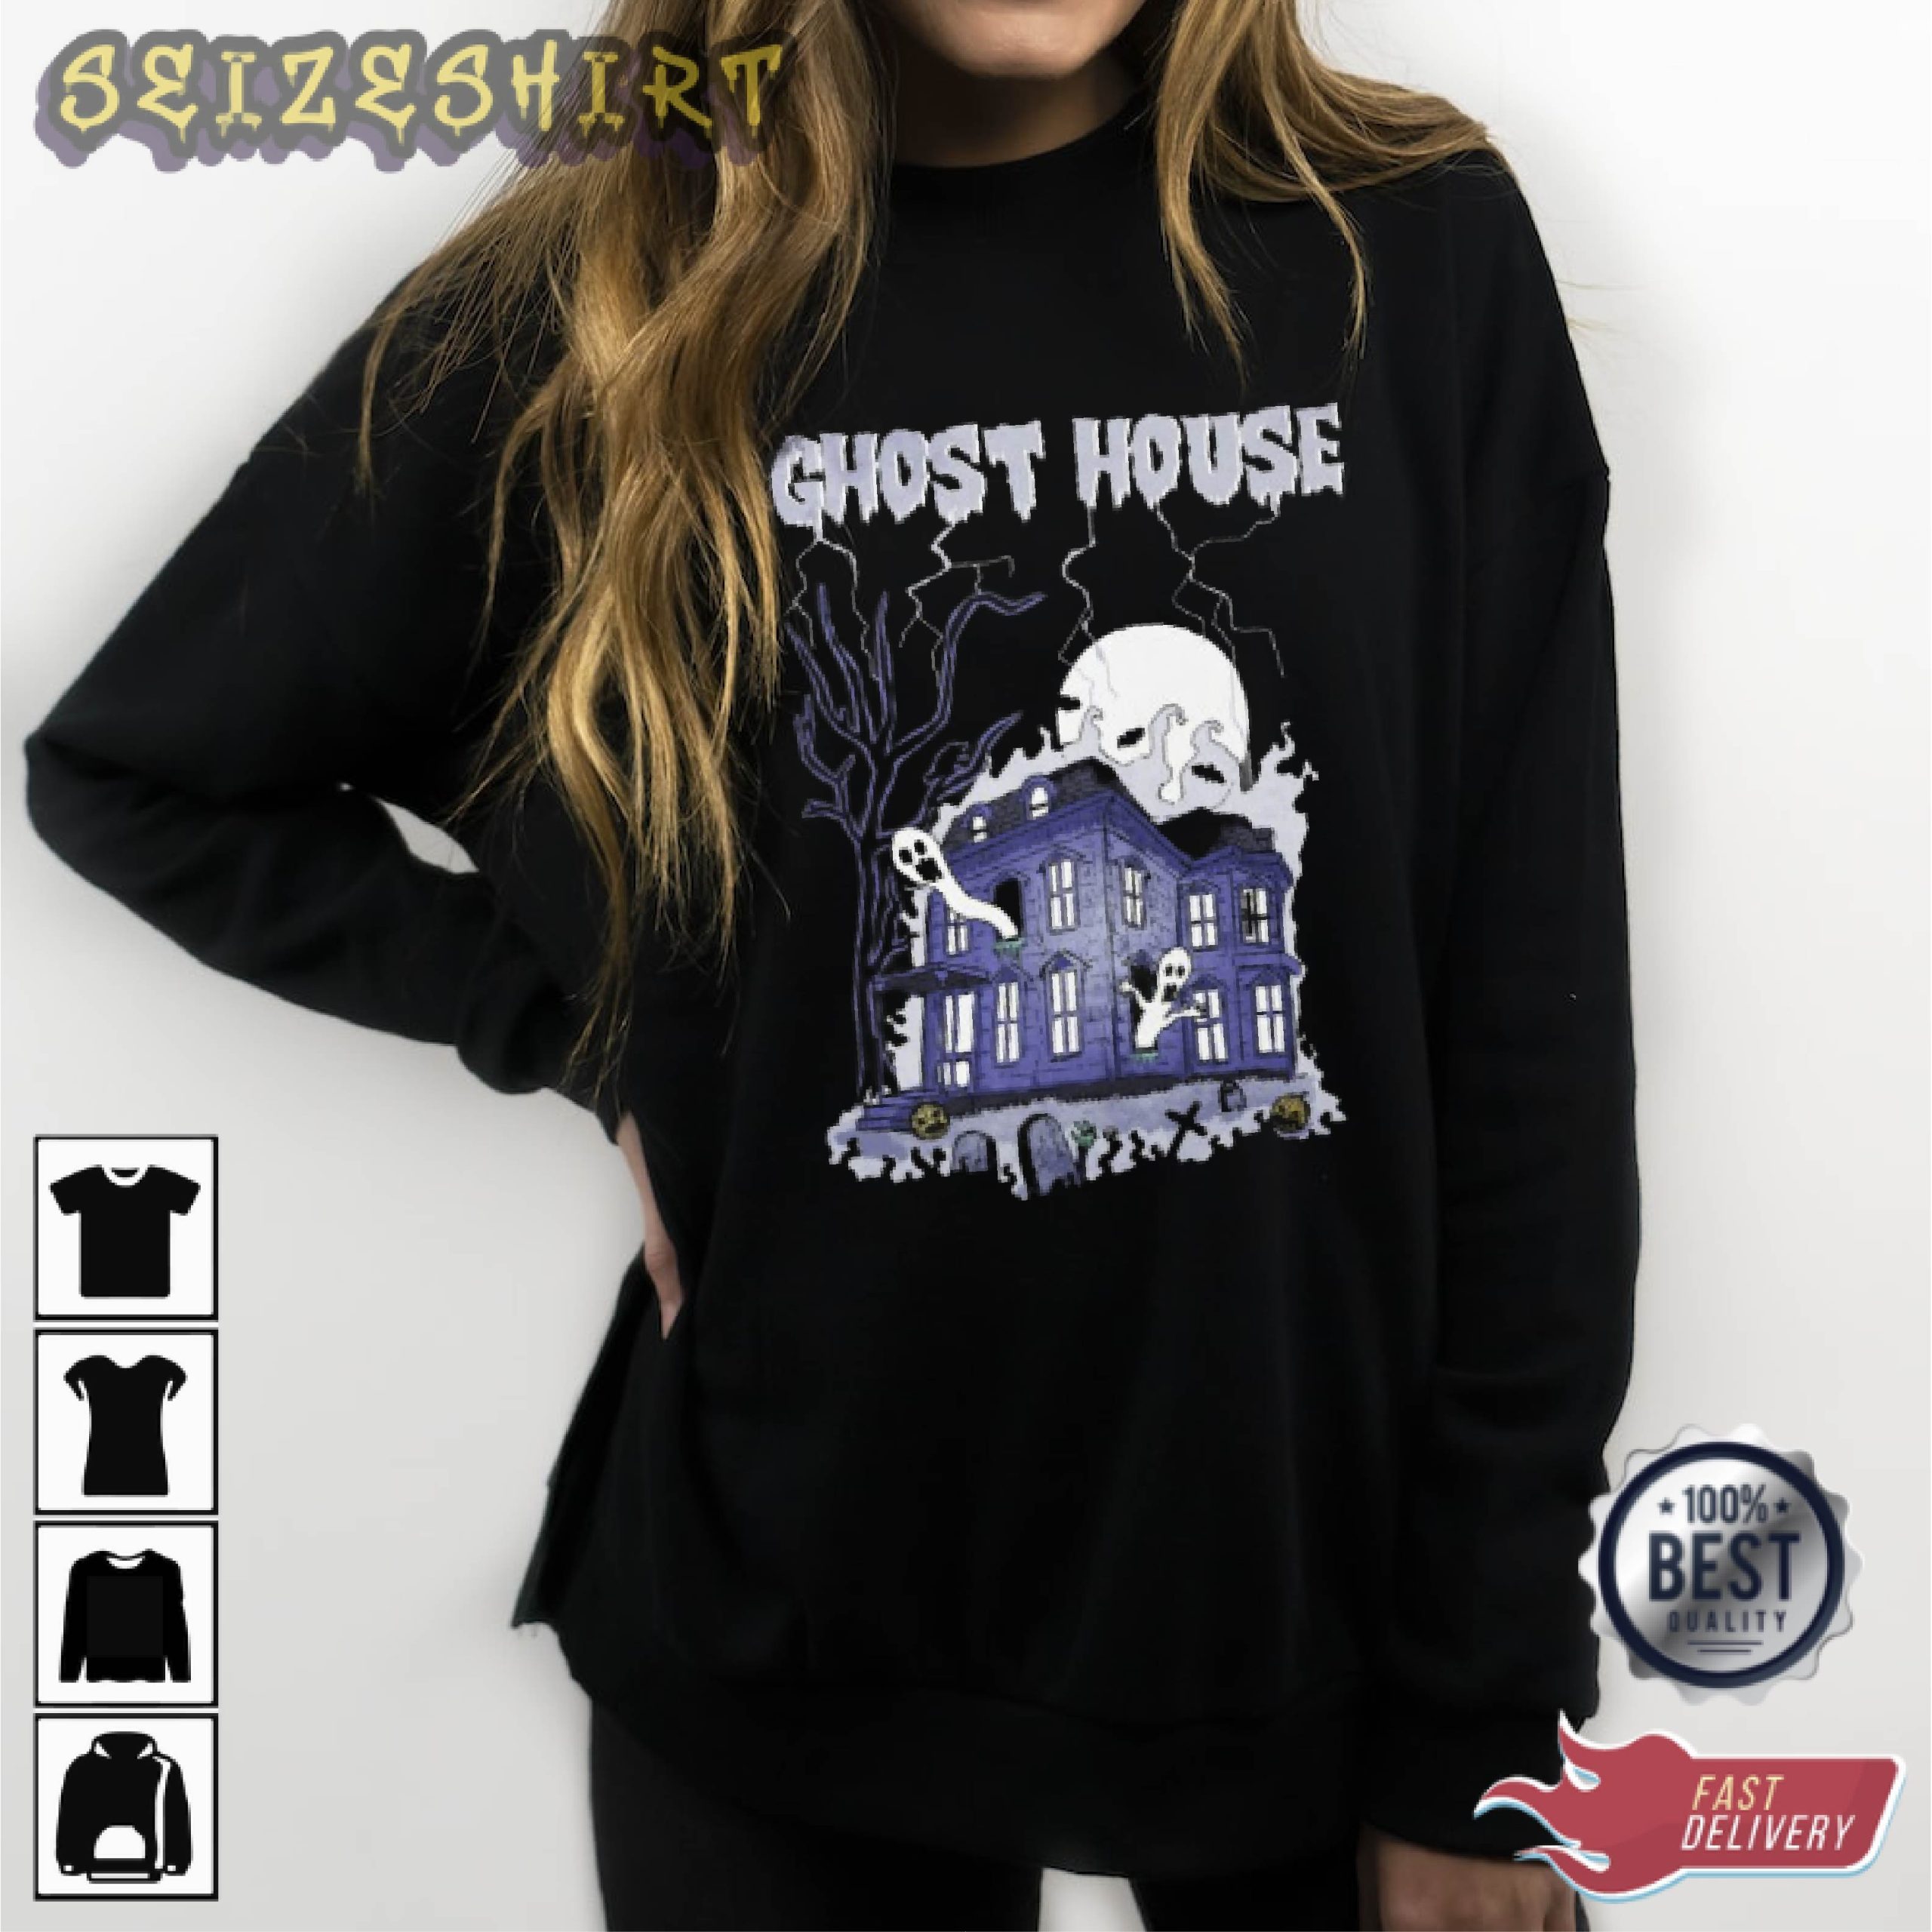 Ghost House Scary Halloween Best Graphic Tee Long Sleeve Shirt